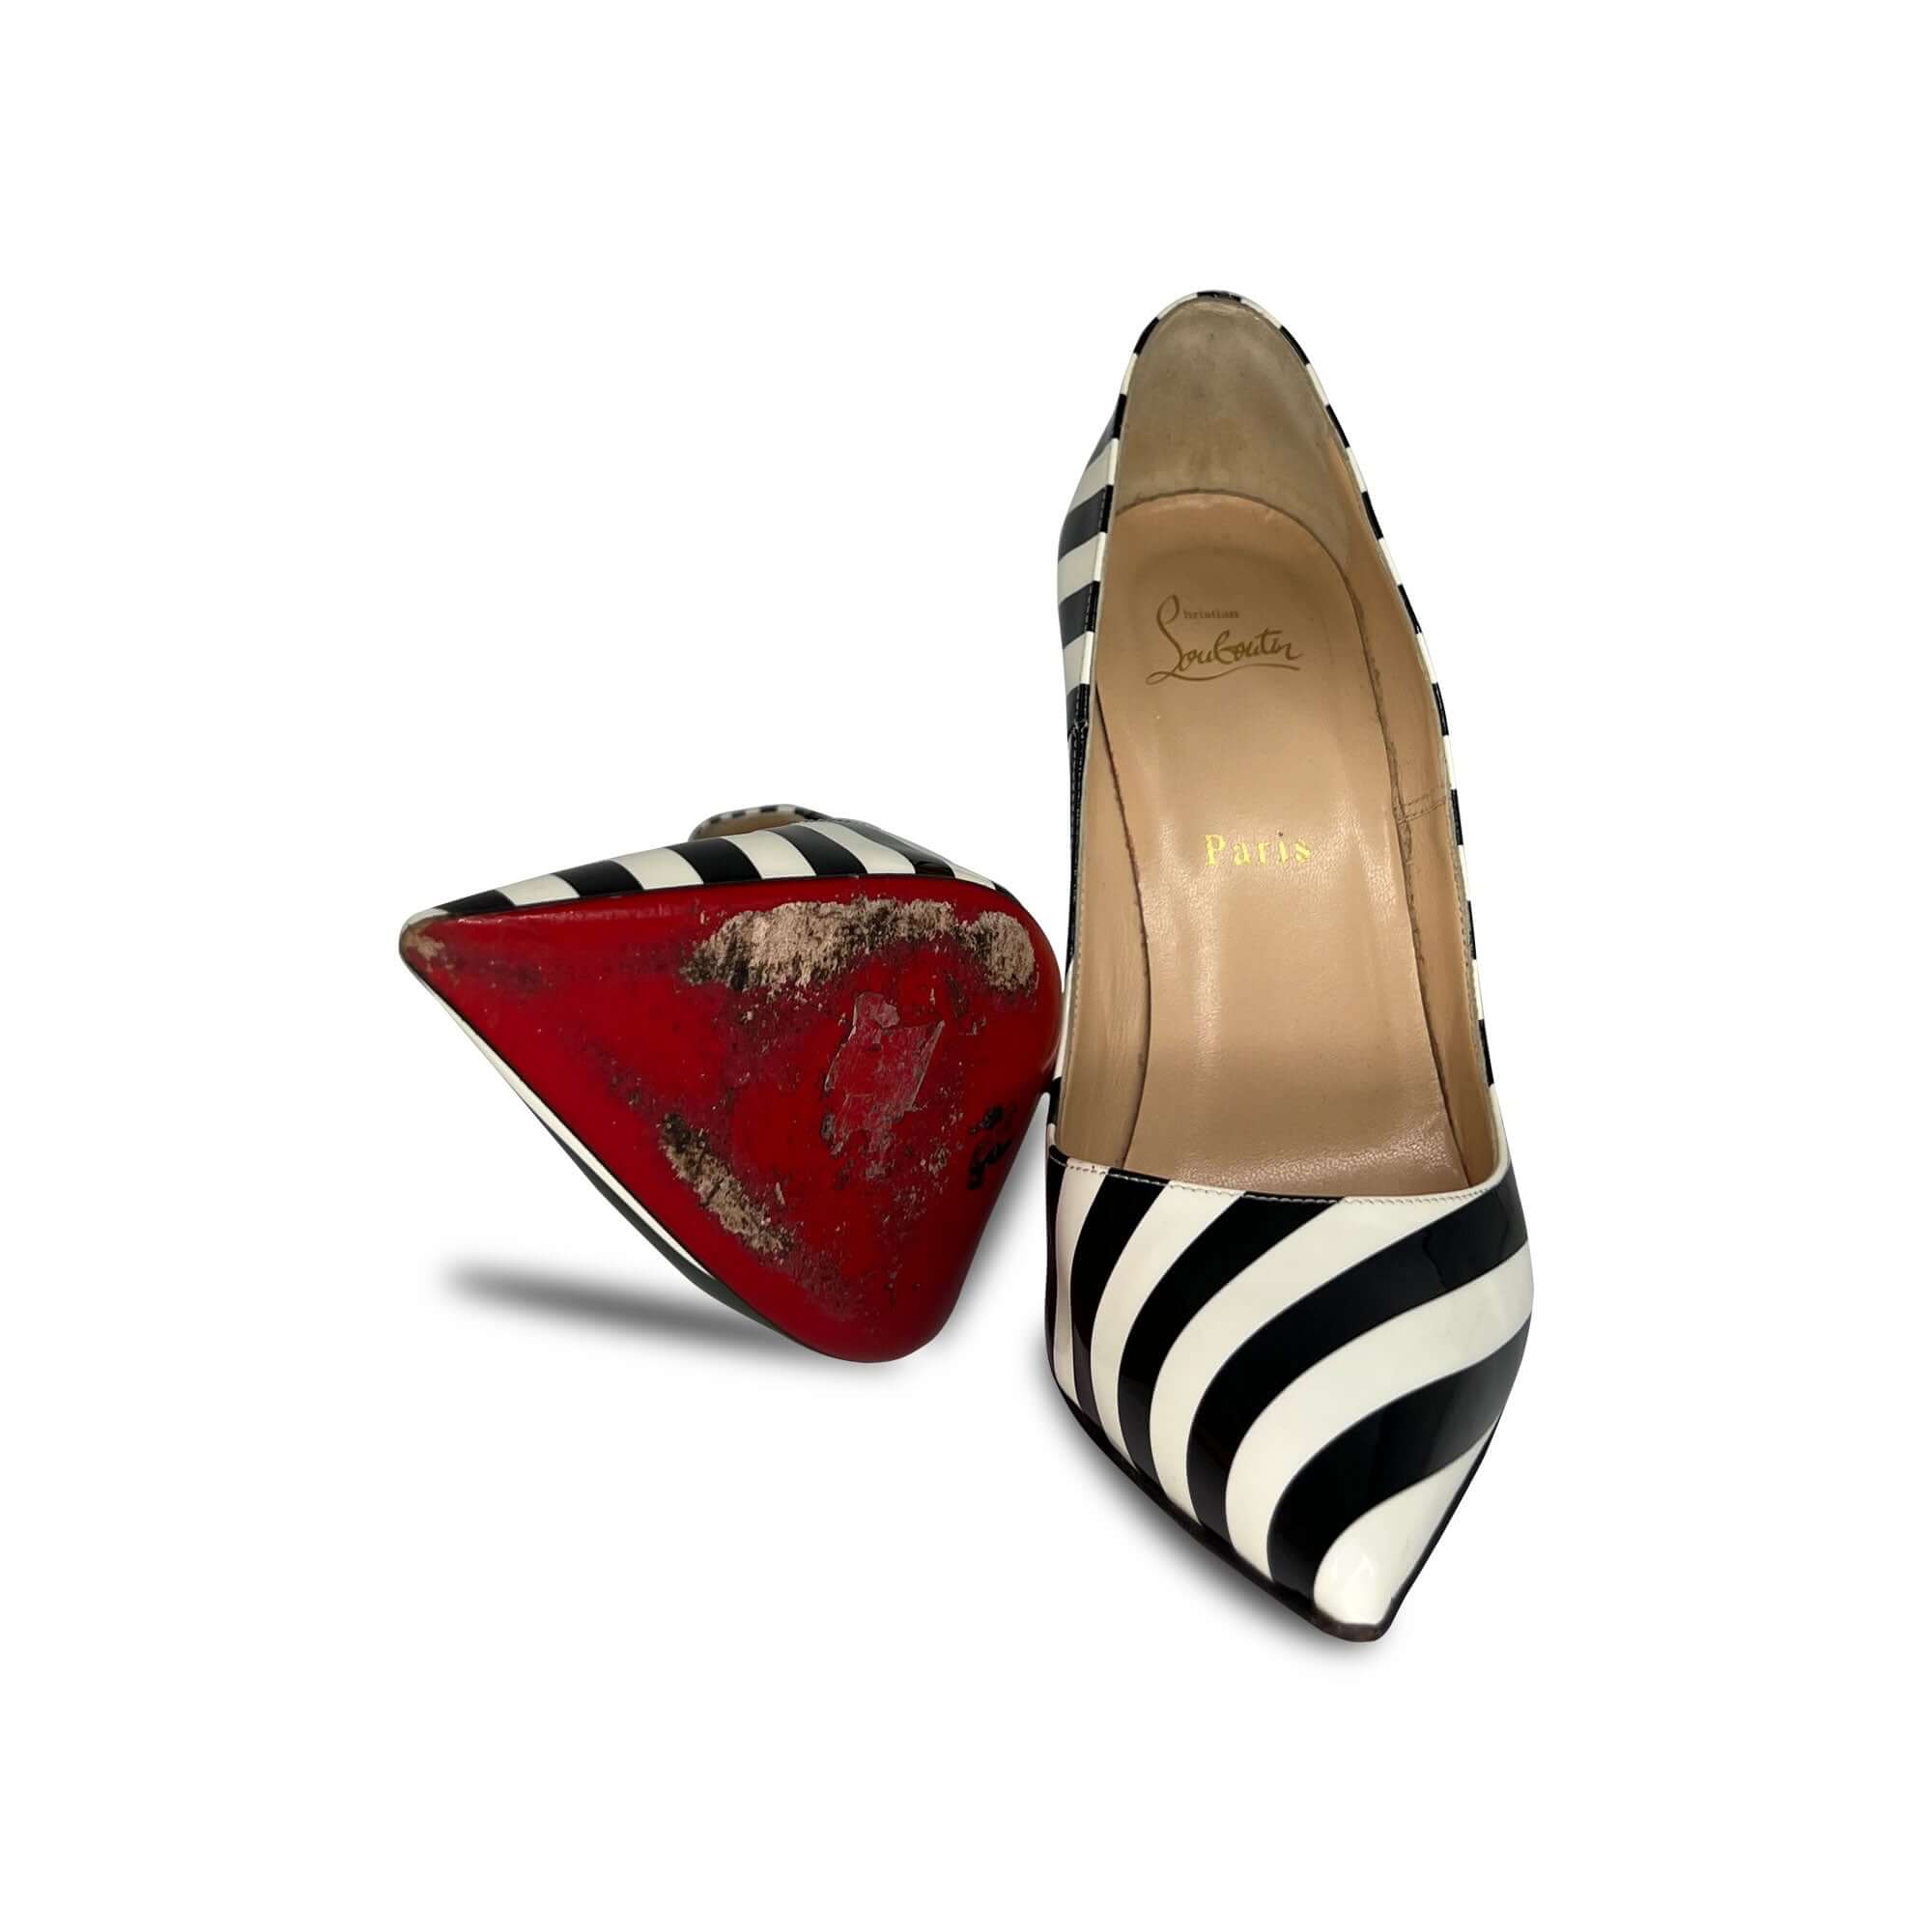 Christian Louboutin So Kate stripped patent leather pumps